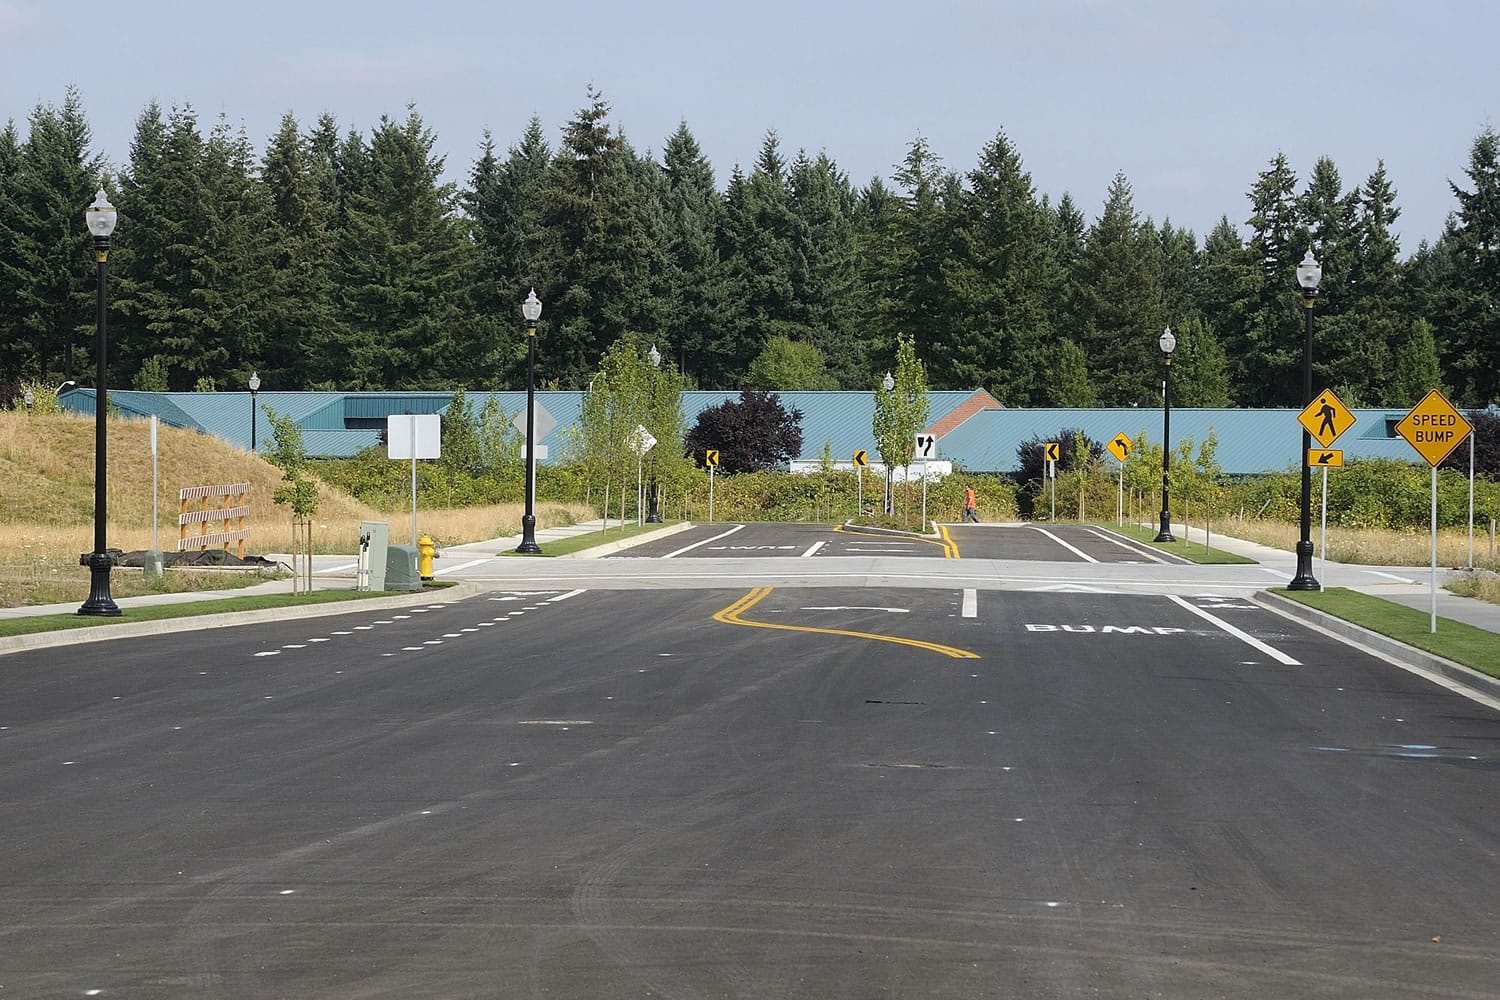 Olympia Drive now cuts north through the former Evergreen Airport site, as owners launch recruiting efforts in the hopes of attracting retail stores to anchor The Landing shopping center.